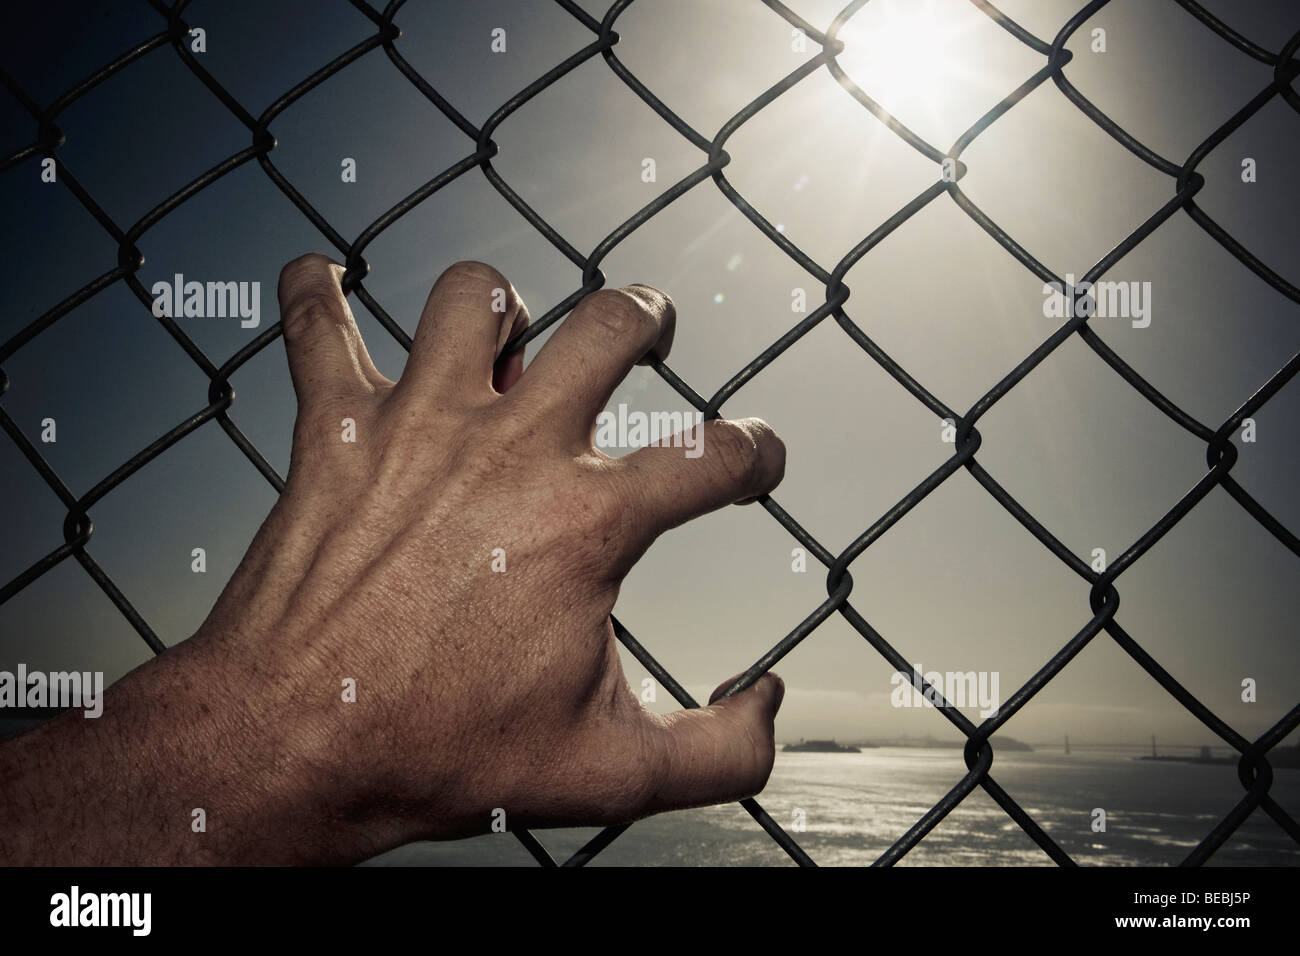 40+ Rusty Fence Crisscross Mesh Stock Photos, Pictures & Royalty-Free  Images - iStock